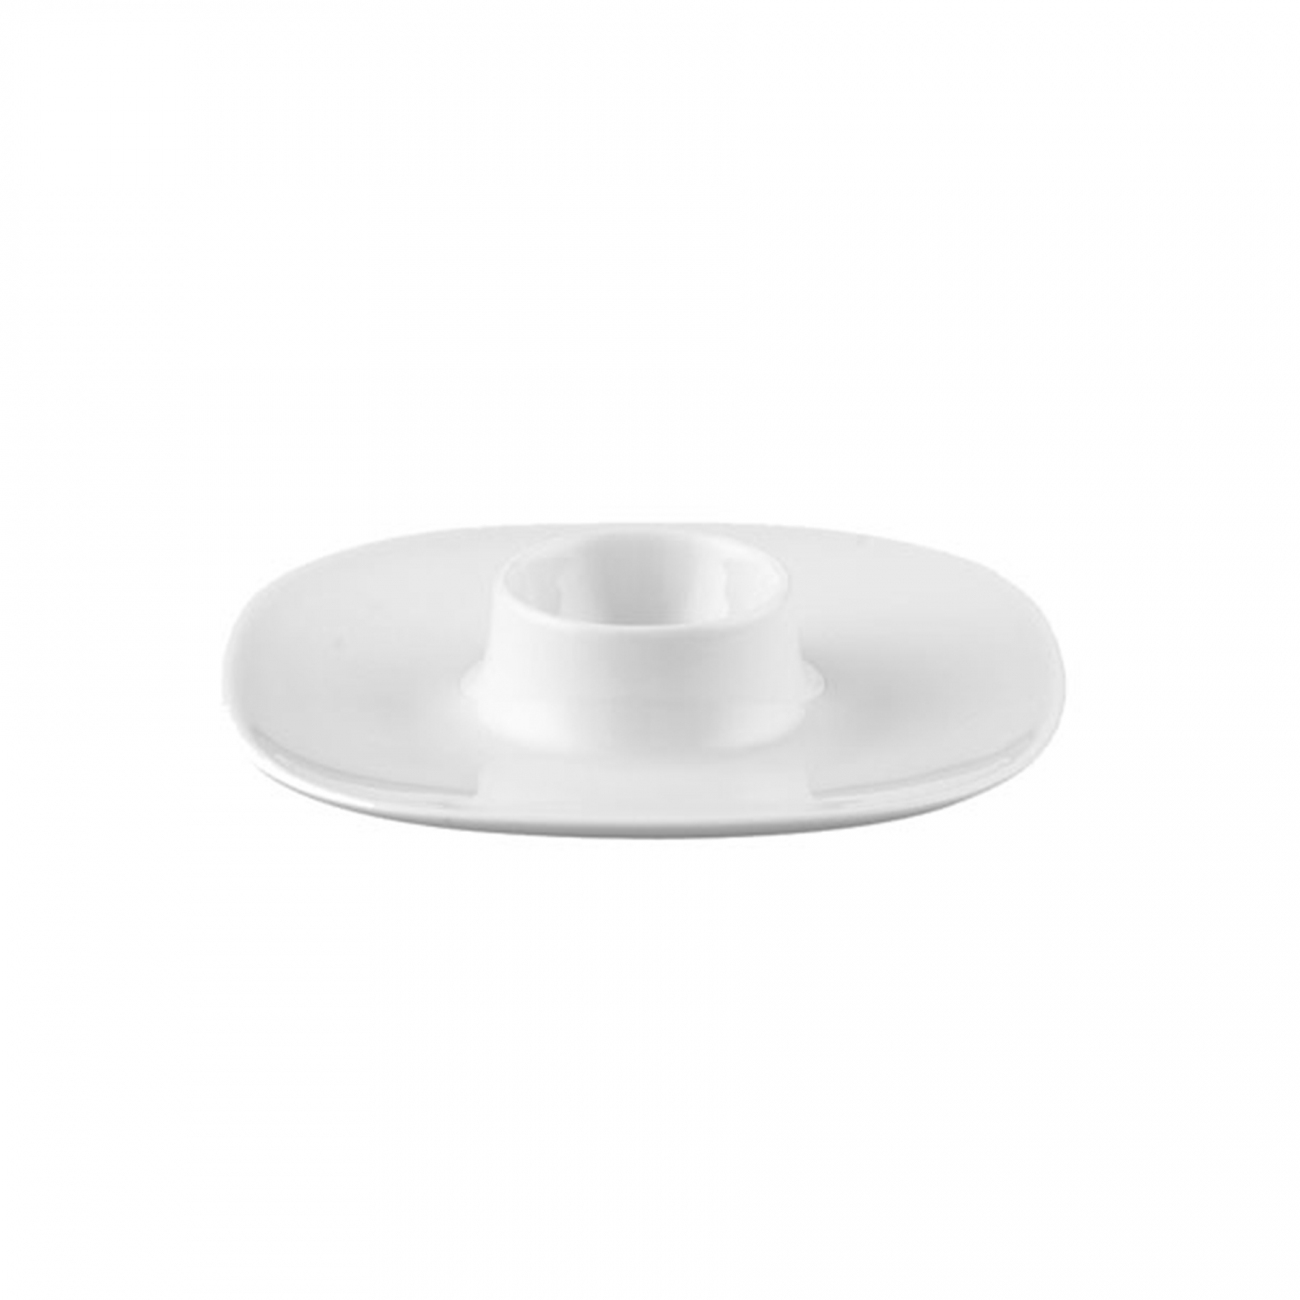 Rosenthal MOON Weiss Egg cup with deposit